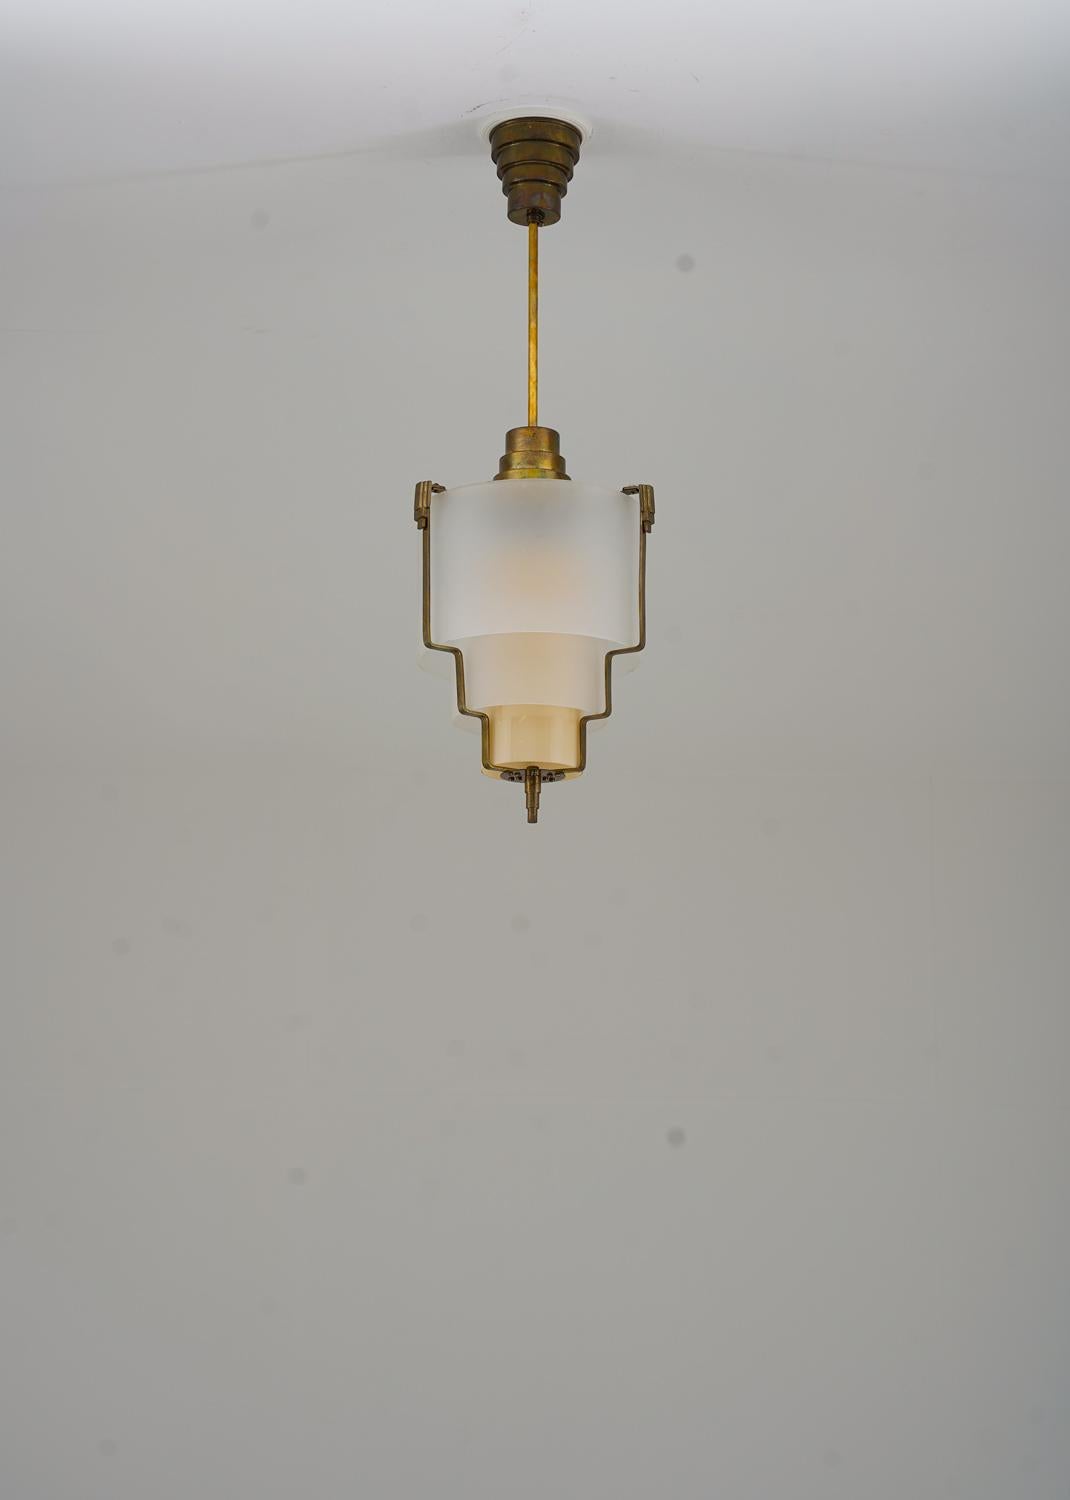 Elegant pendant in brass and blasted glass, most likely produced in Sweden, probably 1930s. 
The lamp consists of three cylinder-shaped glass shades, held in place by a brass frame.

Condition: Very good original condition.

***
PLEASE NOTE